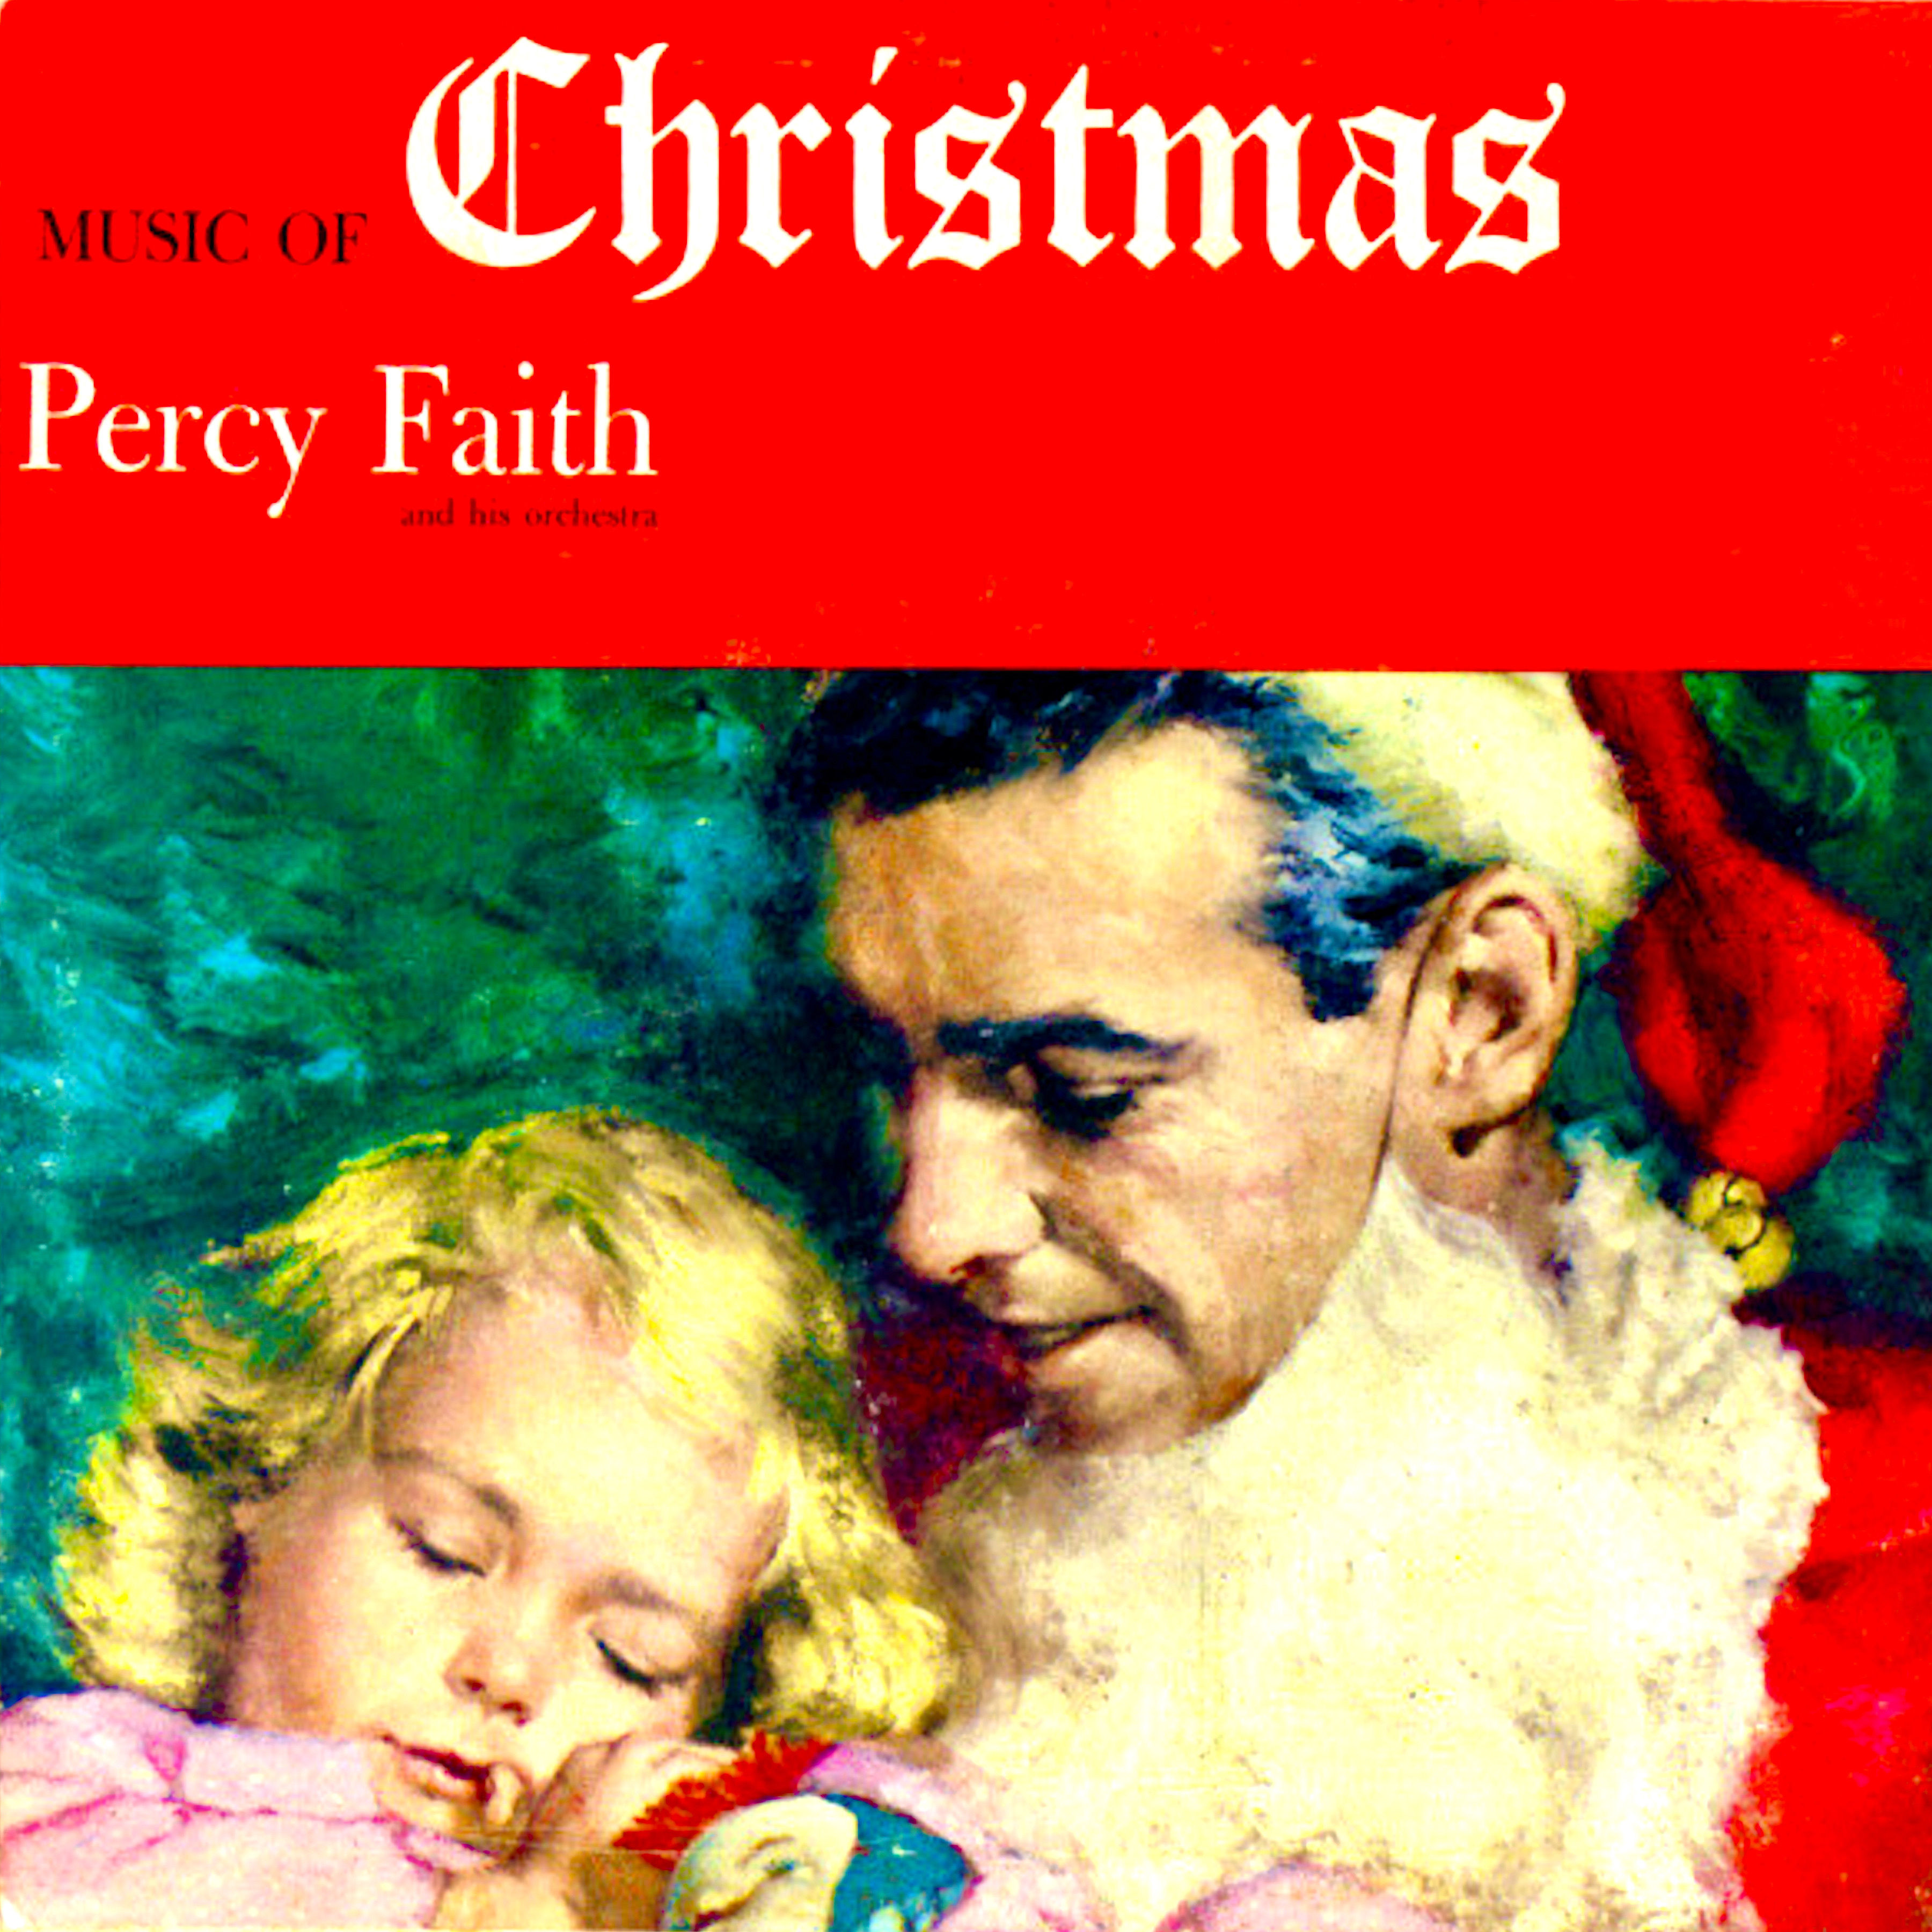 Percy Faith - Music Of Christmas (1959/2021) [Official Digital Download 24bit/96kHz]